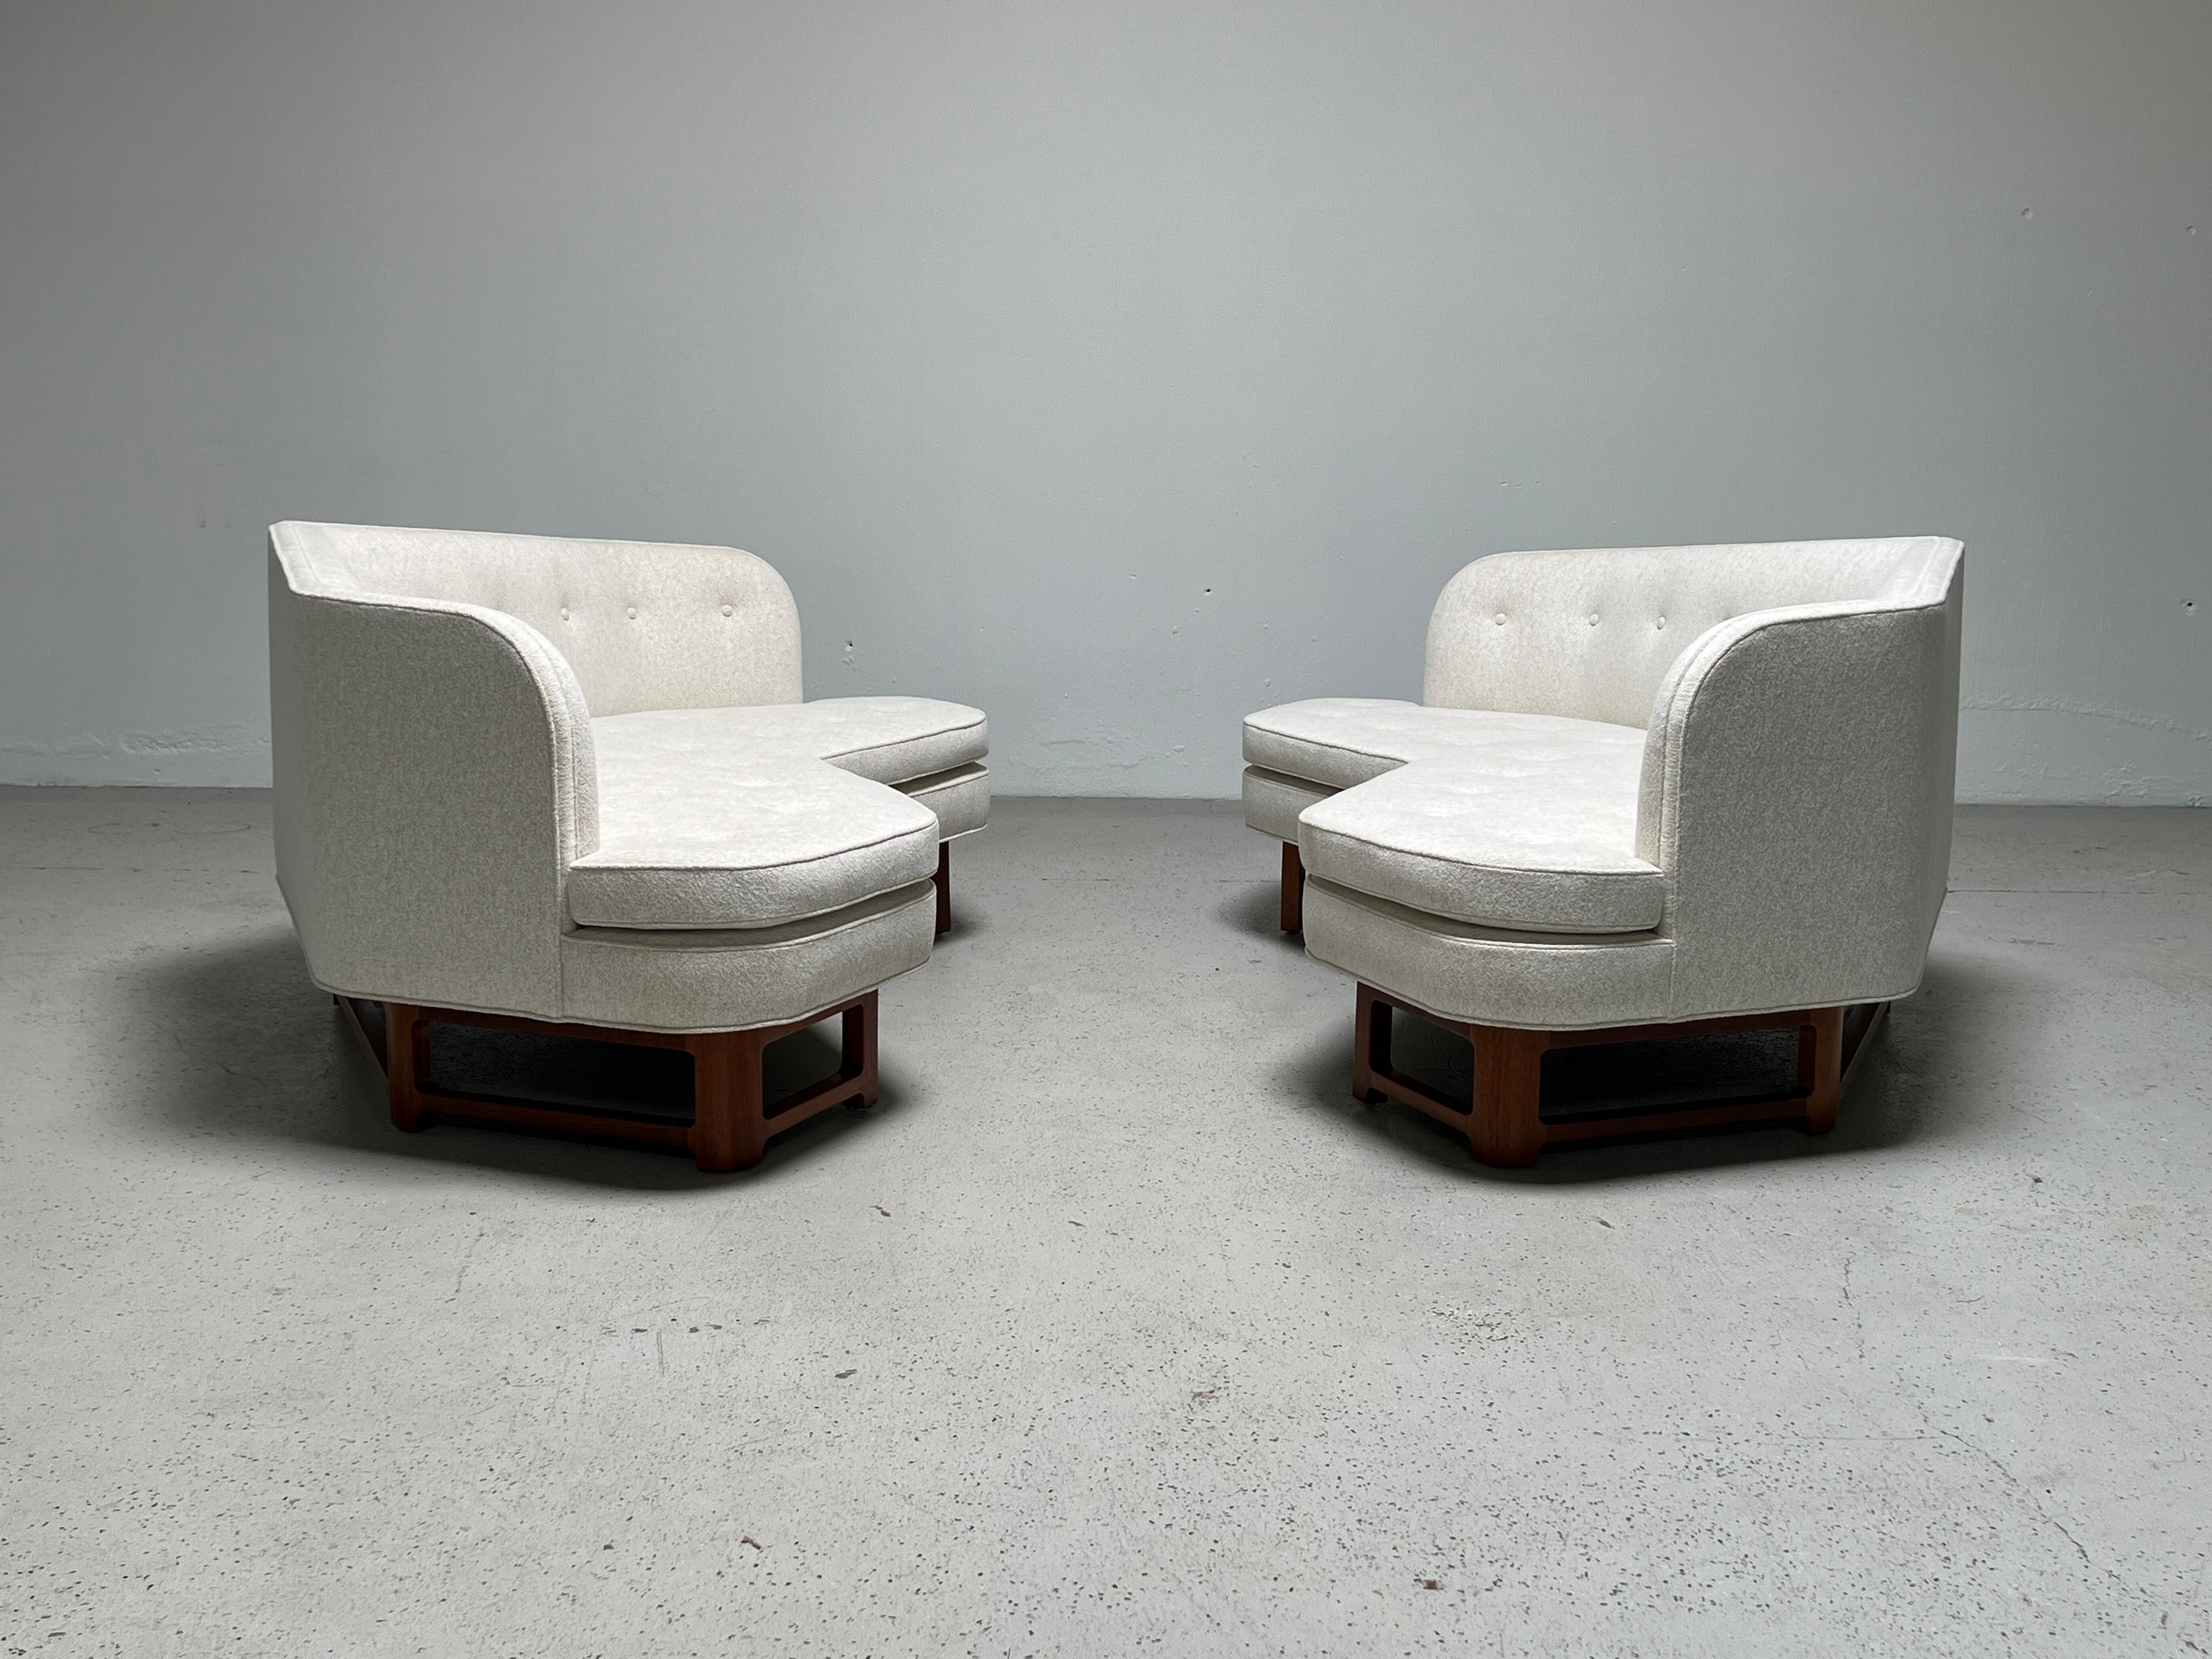 Pair of Angled Sofas by Edward Wormley for Dunbar 1